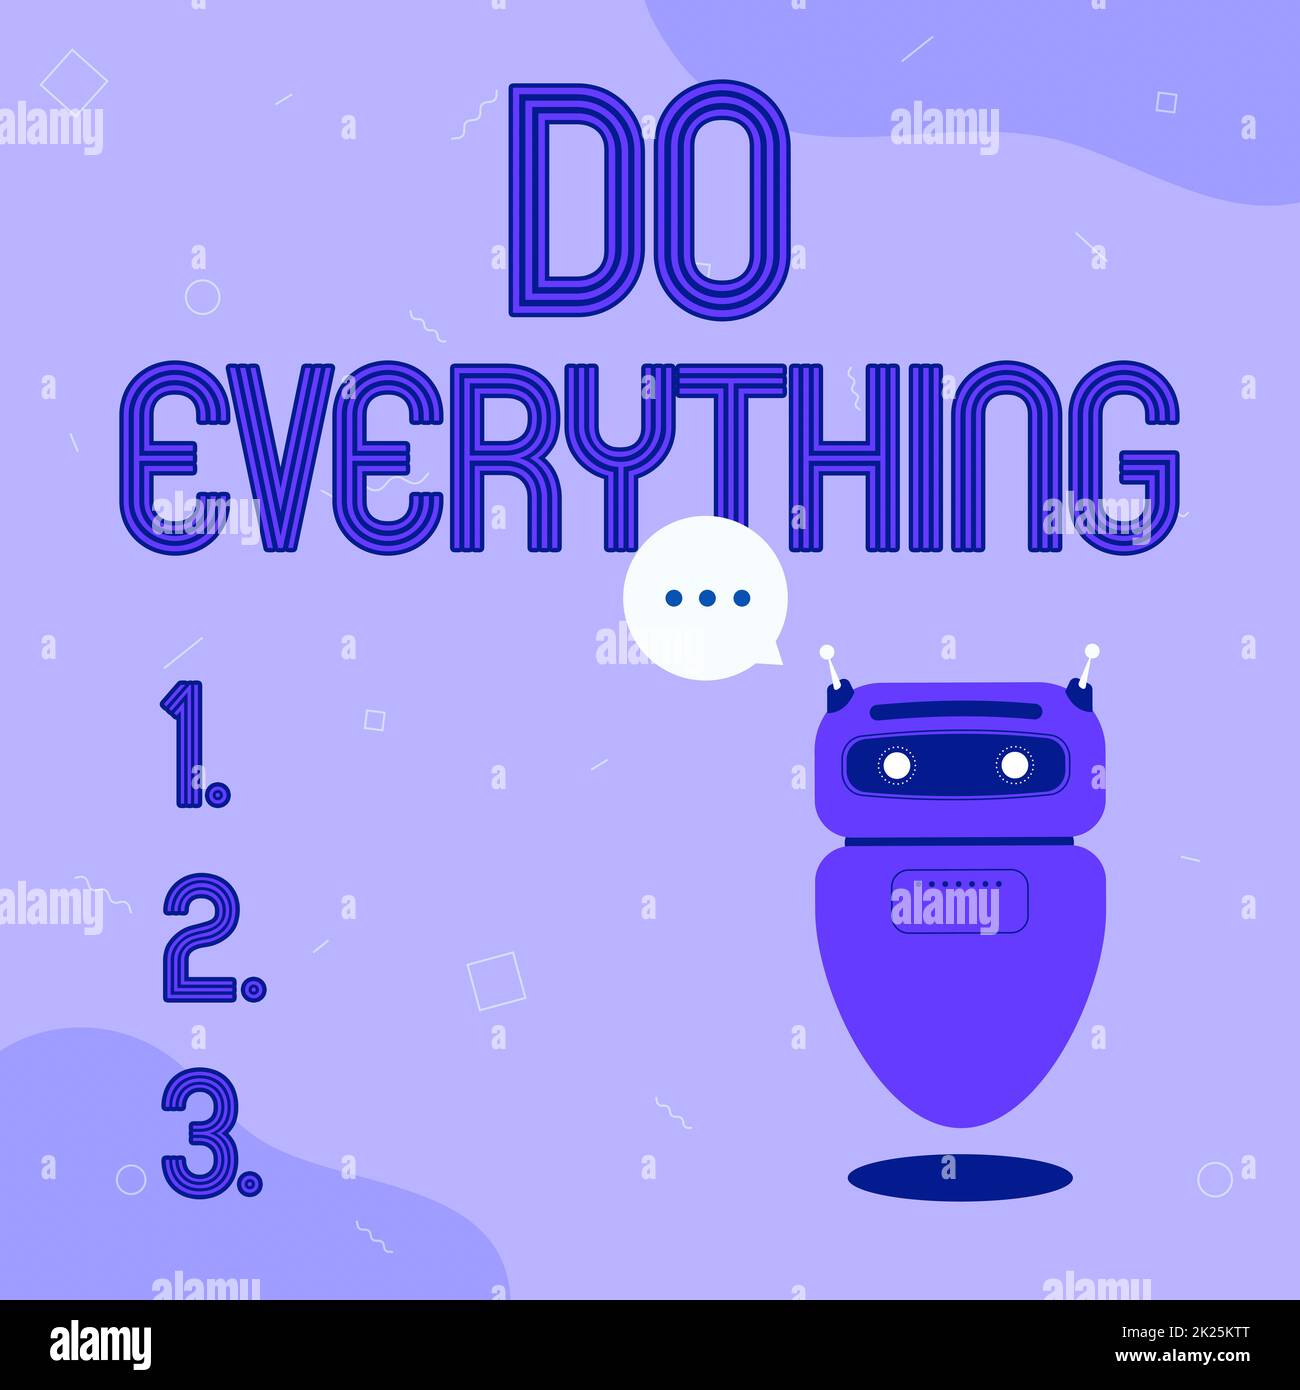 Inspiration showing sign Do Everything. Business showcase Jack of All Trades Self Esteem Ego Pride No Limits Illustration Of Cute Floating Robot Telling Information In A Chat Cloud. Stock Photo